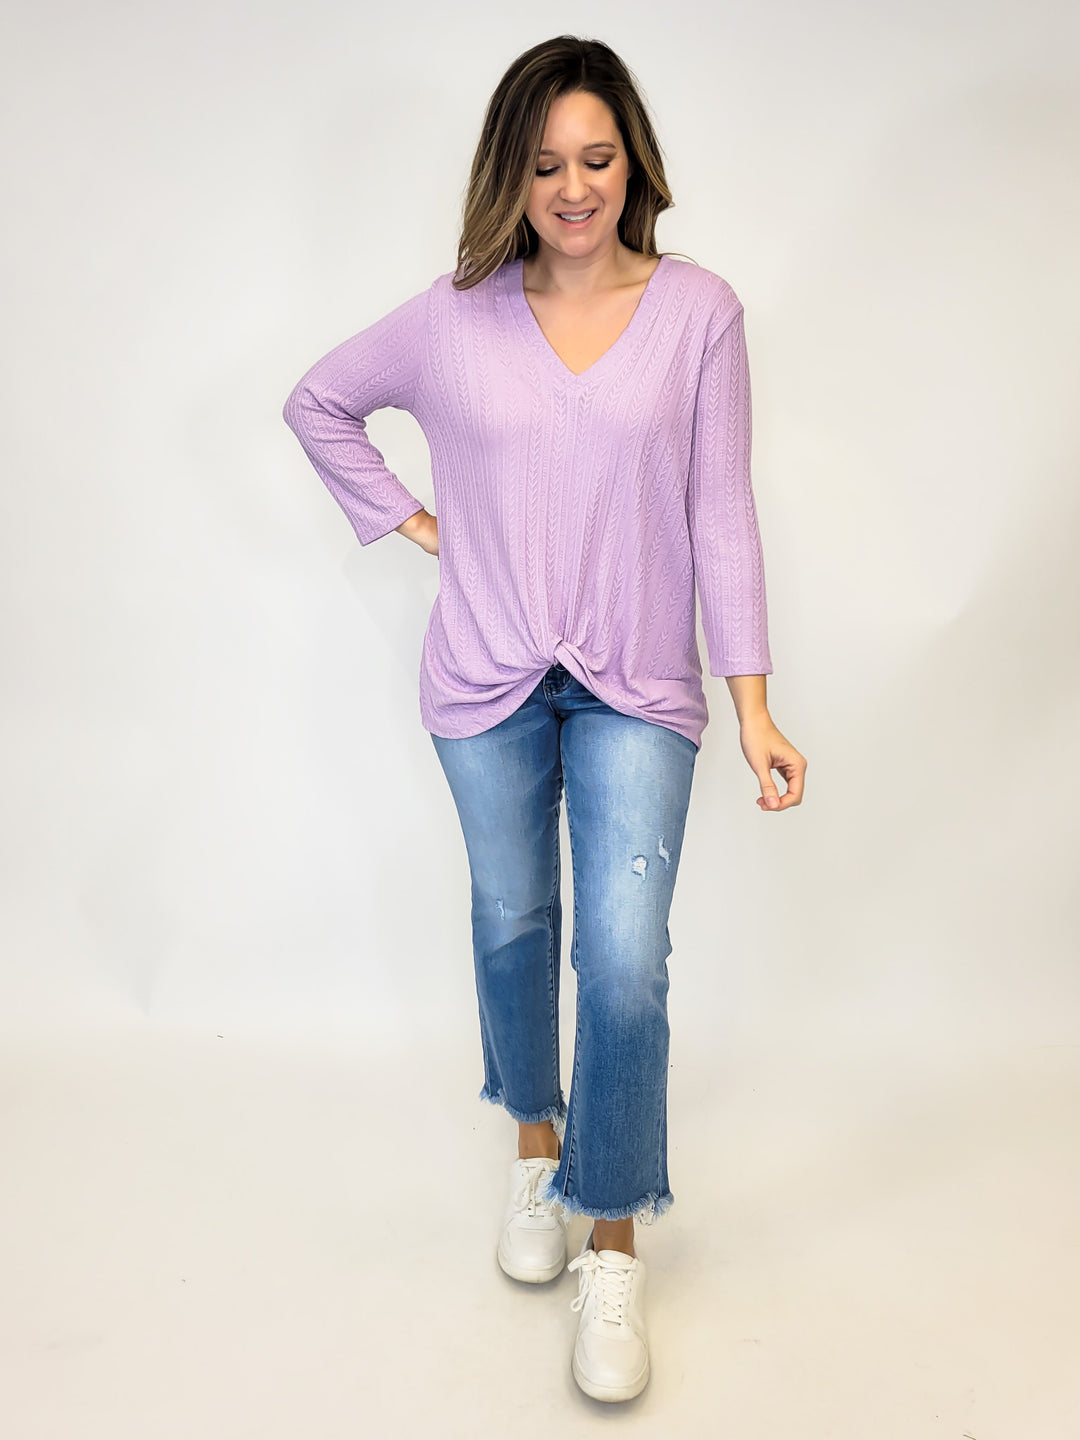 TWIST FRONT 3/4 SLEEVE SOLID KNIT TOP - LAVENDER